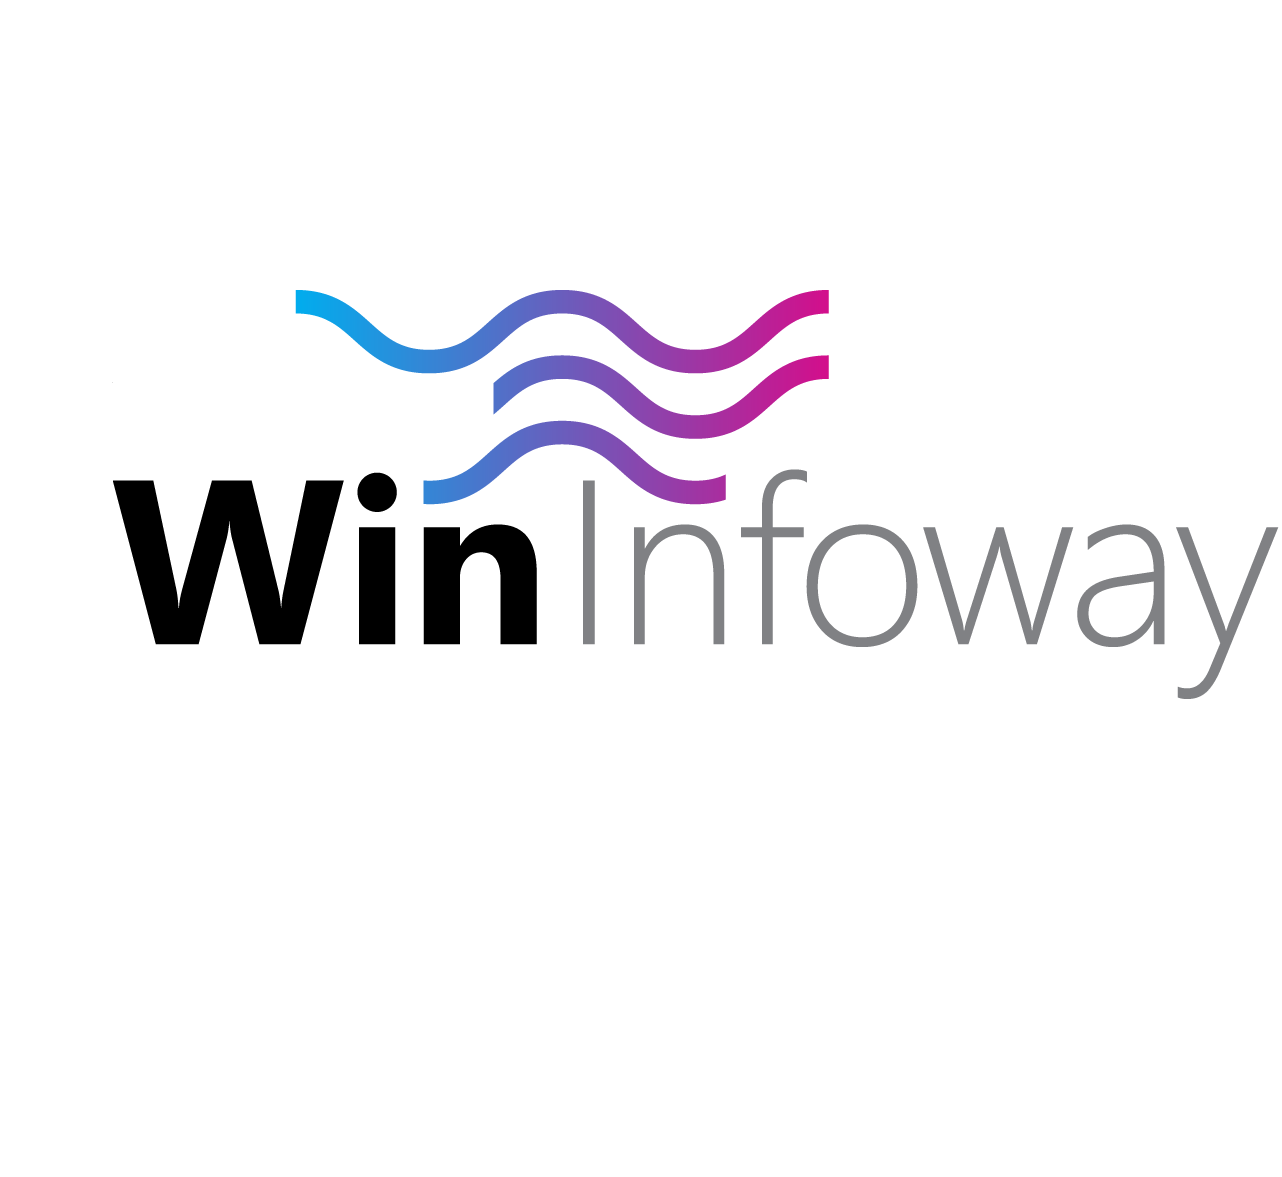 Win Infoway profile on Qualified.One